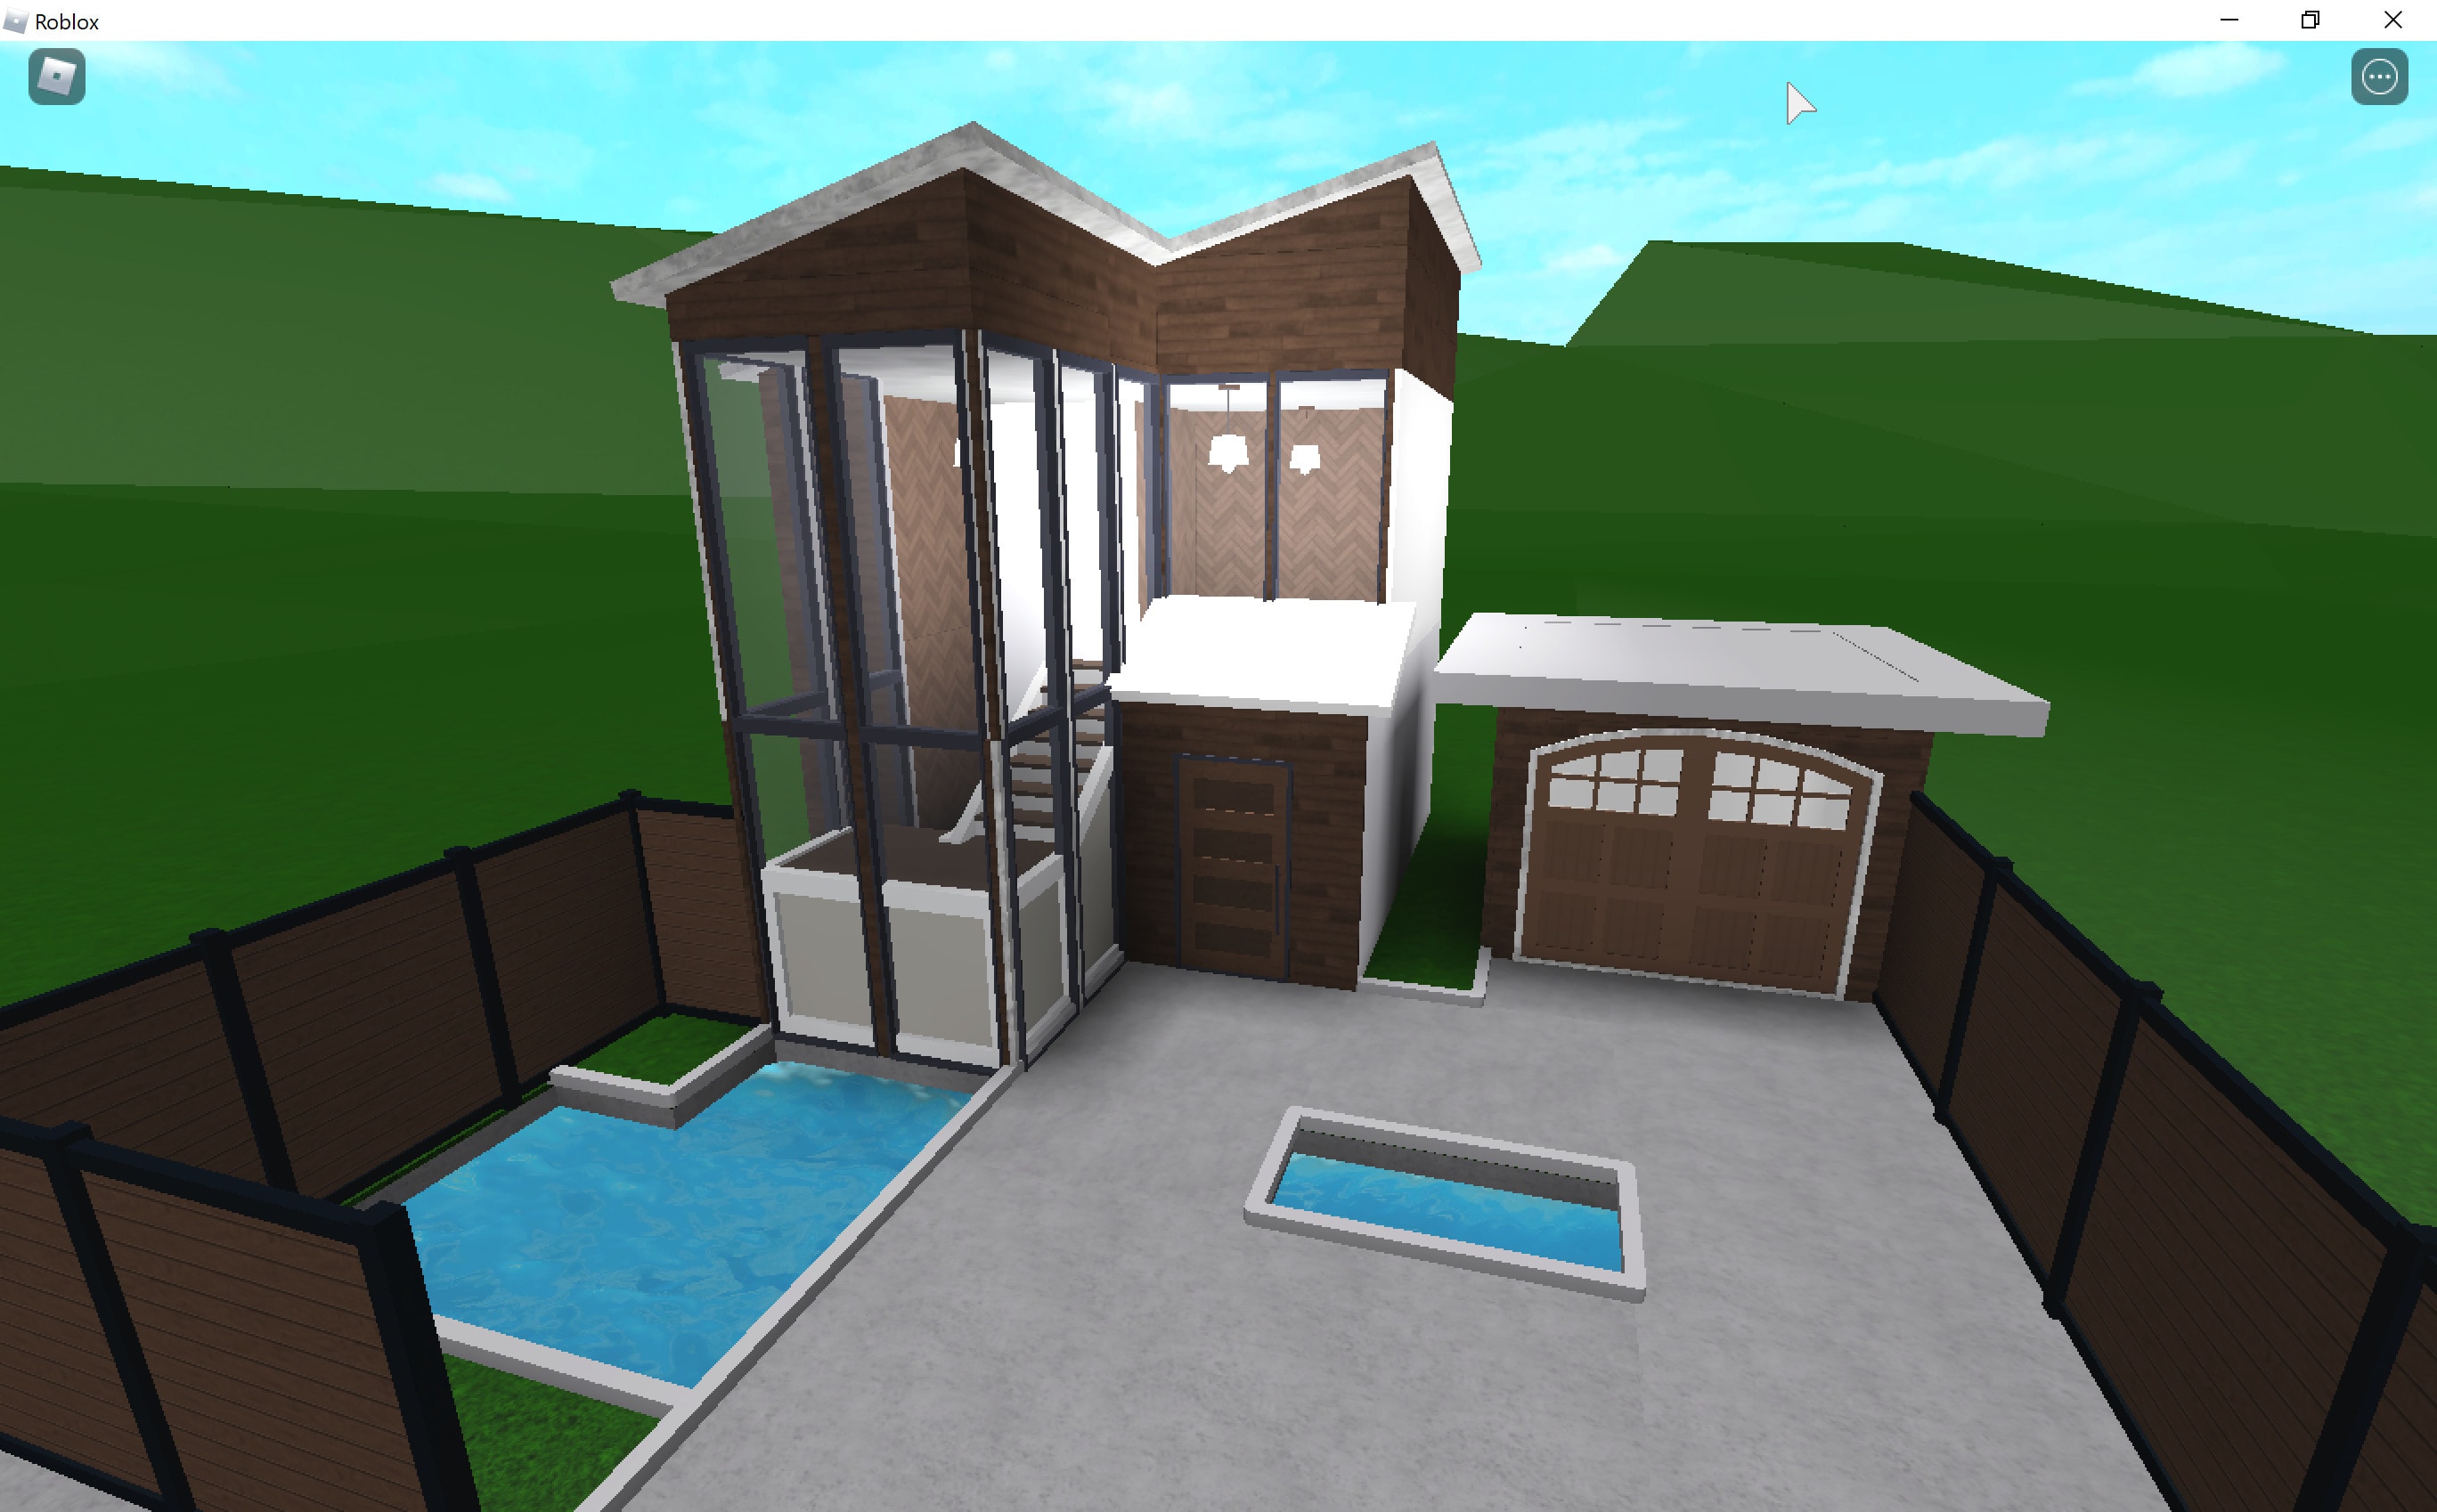 Build You Anything In Bloxburg From Towns To Dream Homes By Mythiiq Yt - union roblox roblox myth fanart roblox bloxburg houses